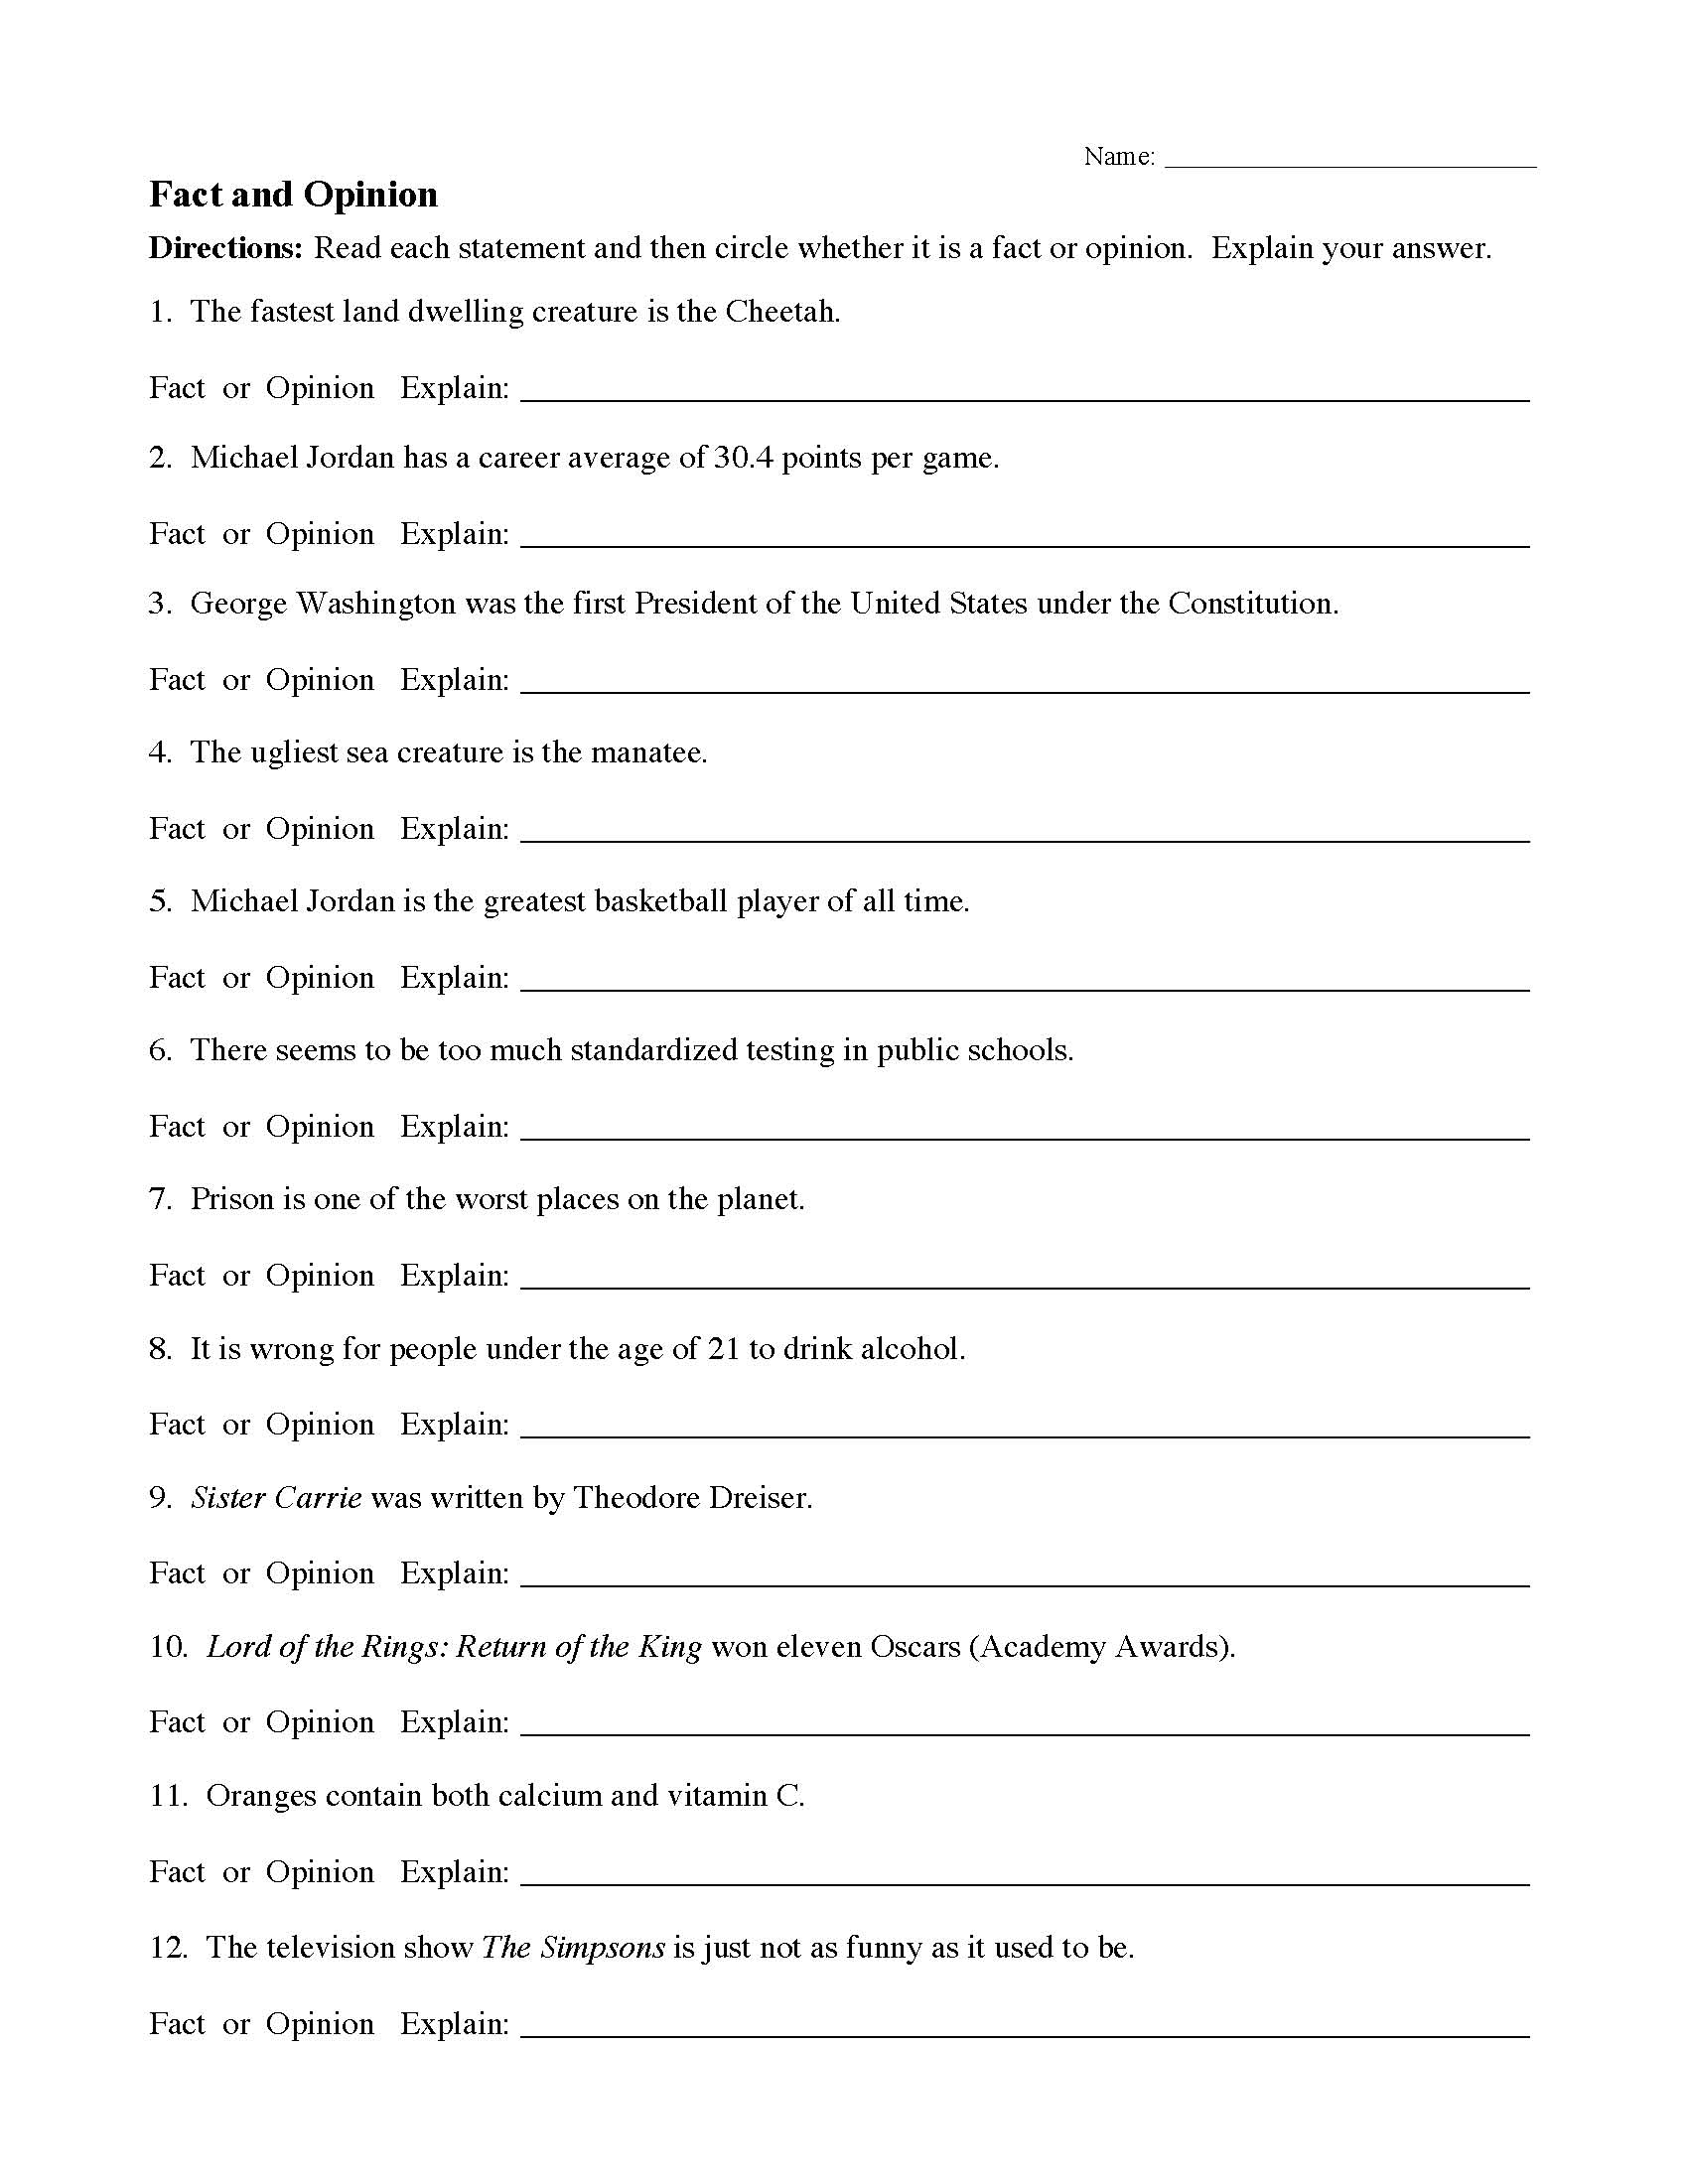 fact-and-opinion-worksheet-1-preview